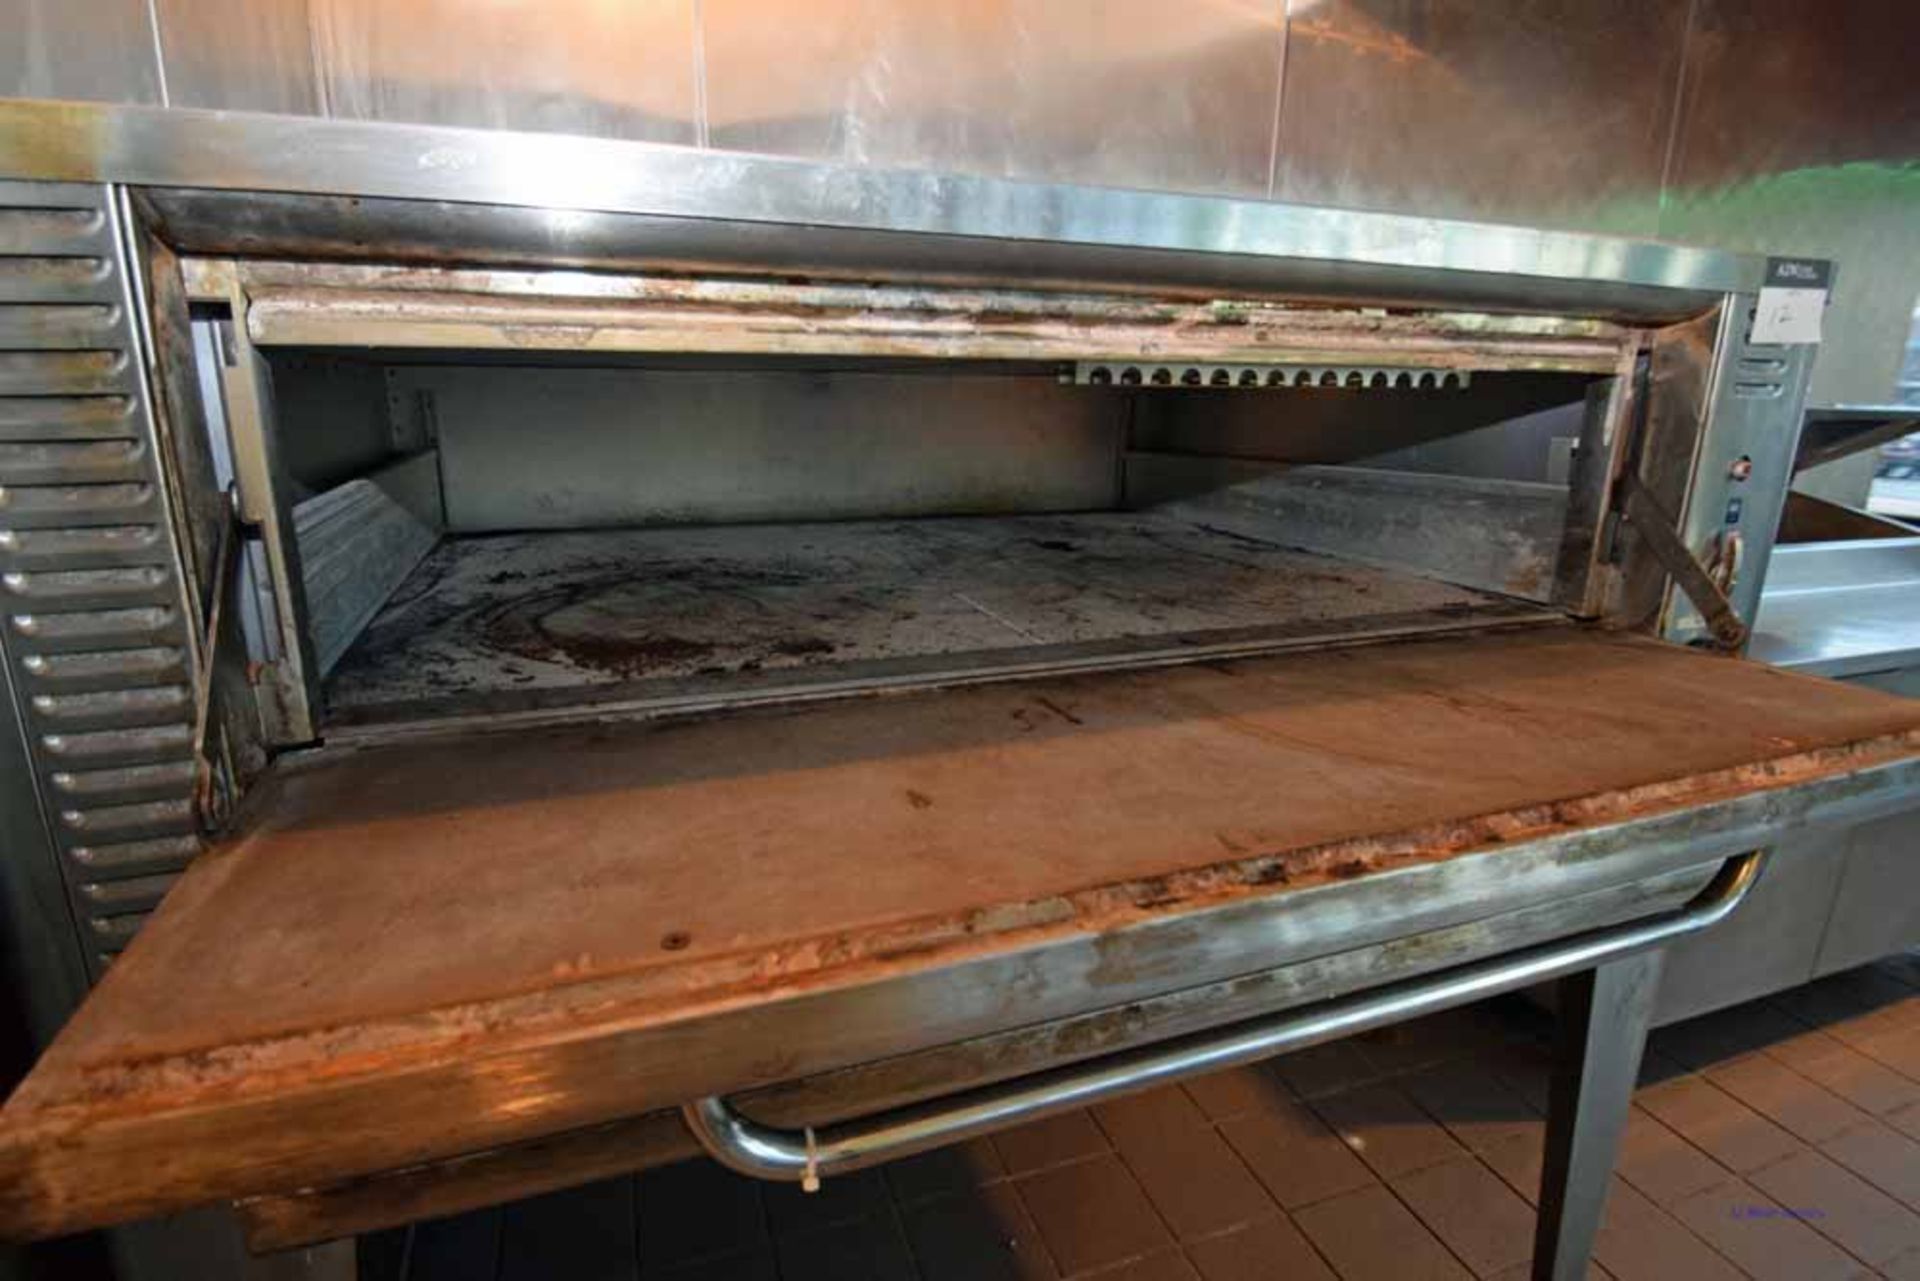 Blodgett 961P Single Pizza Deck Oven 60" Wide - Image 5 of 6